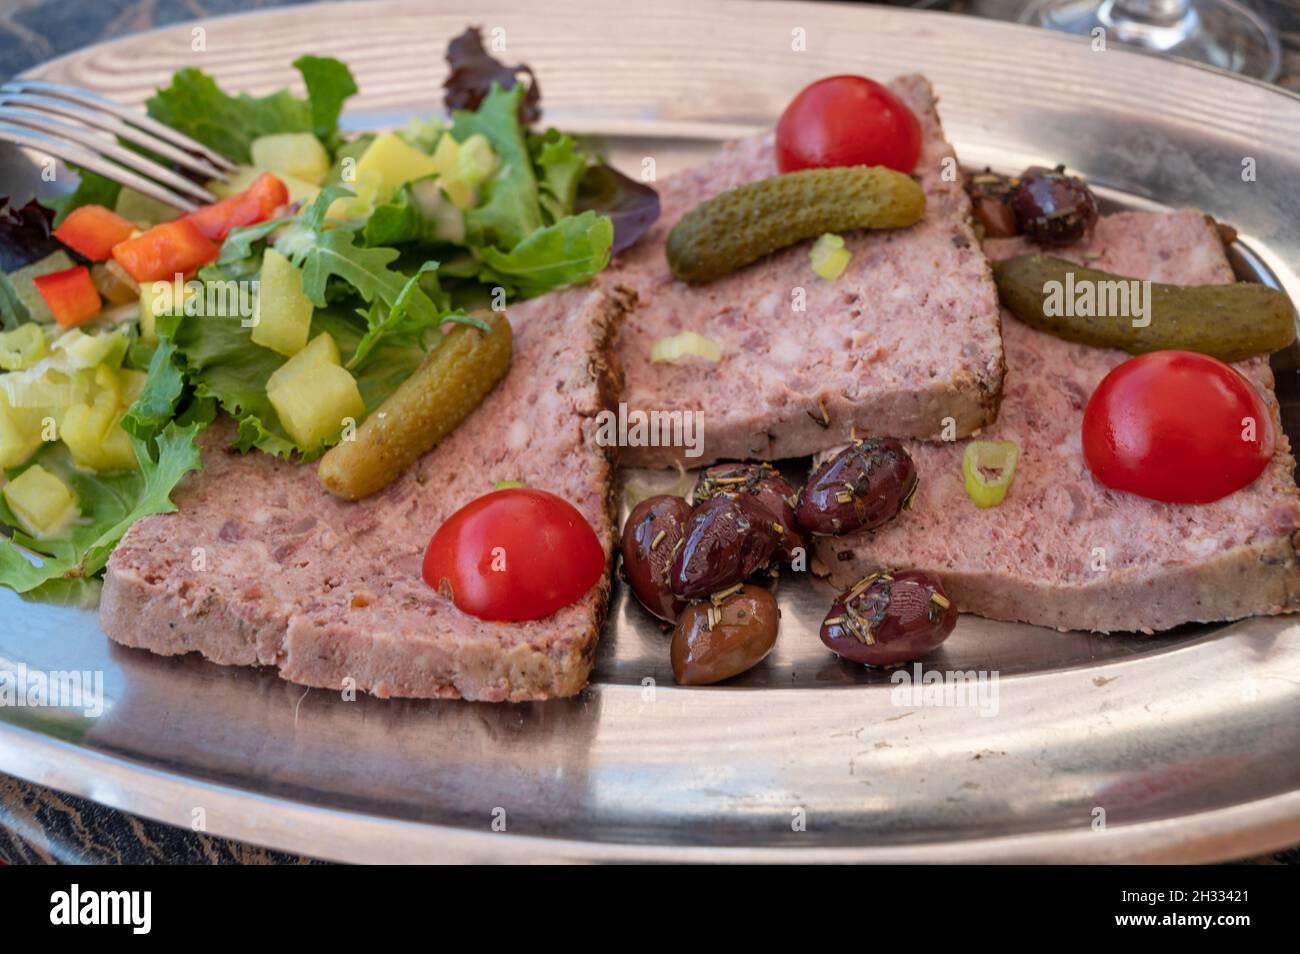 A typical meat paté served as a starter in Provnce, France Stock Photo